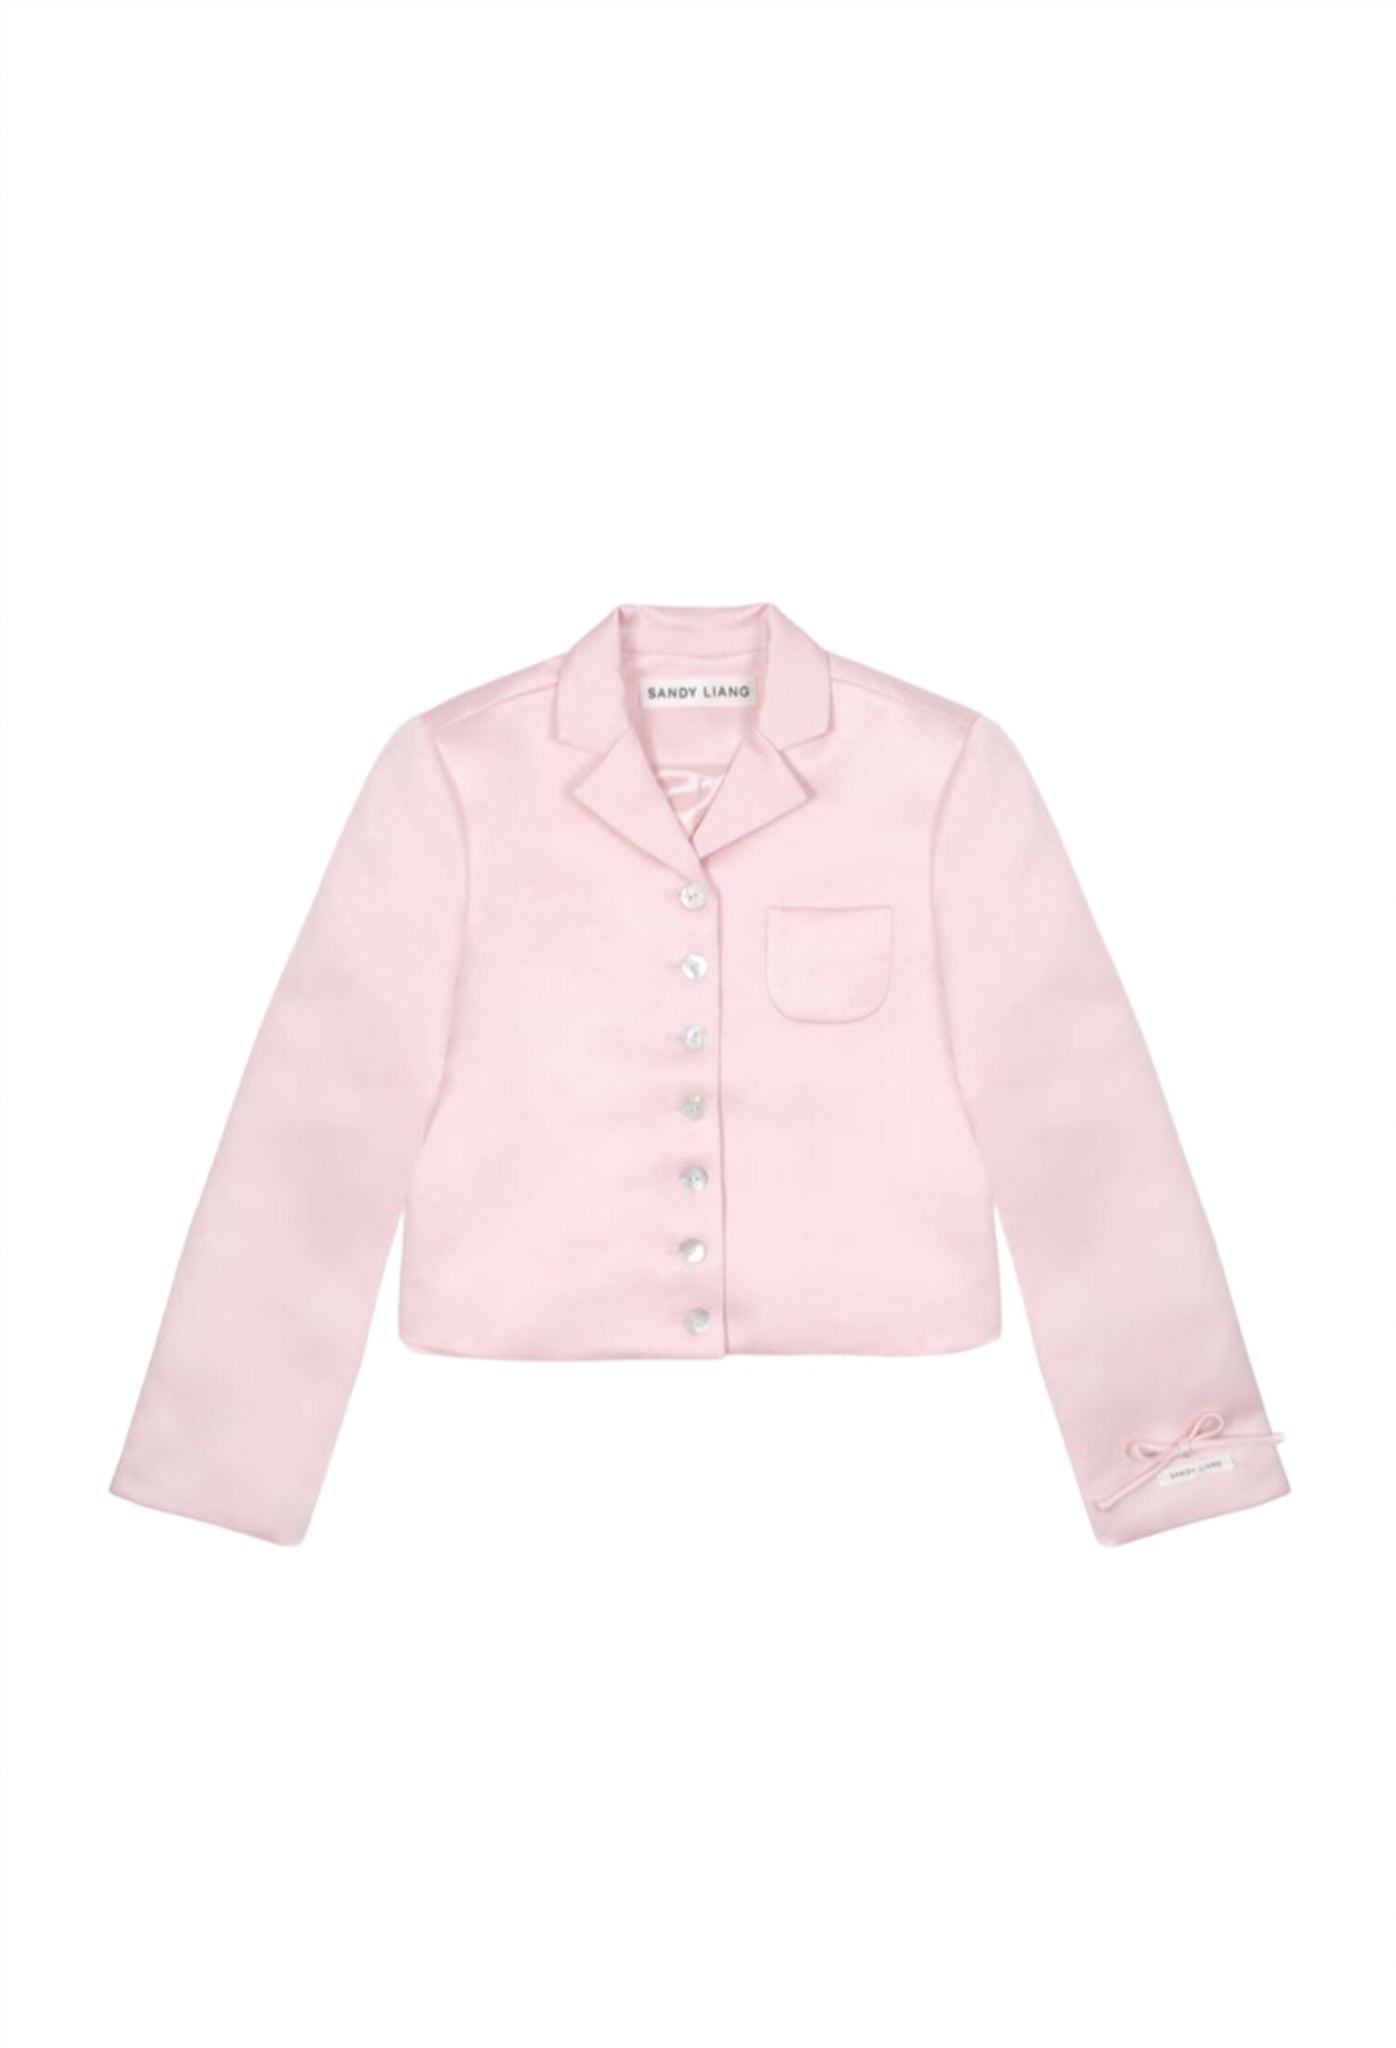 Charm Jacket in Pink Satin